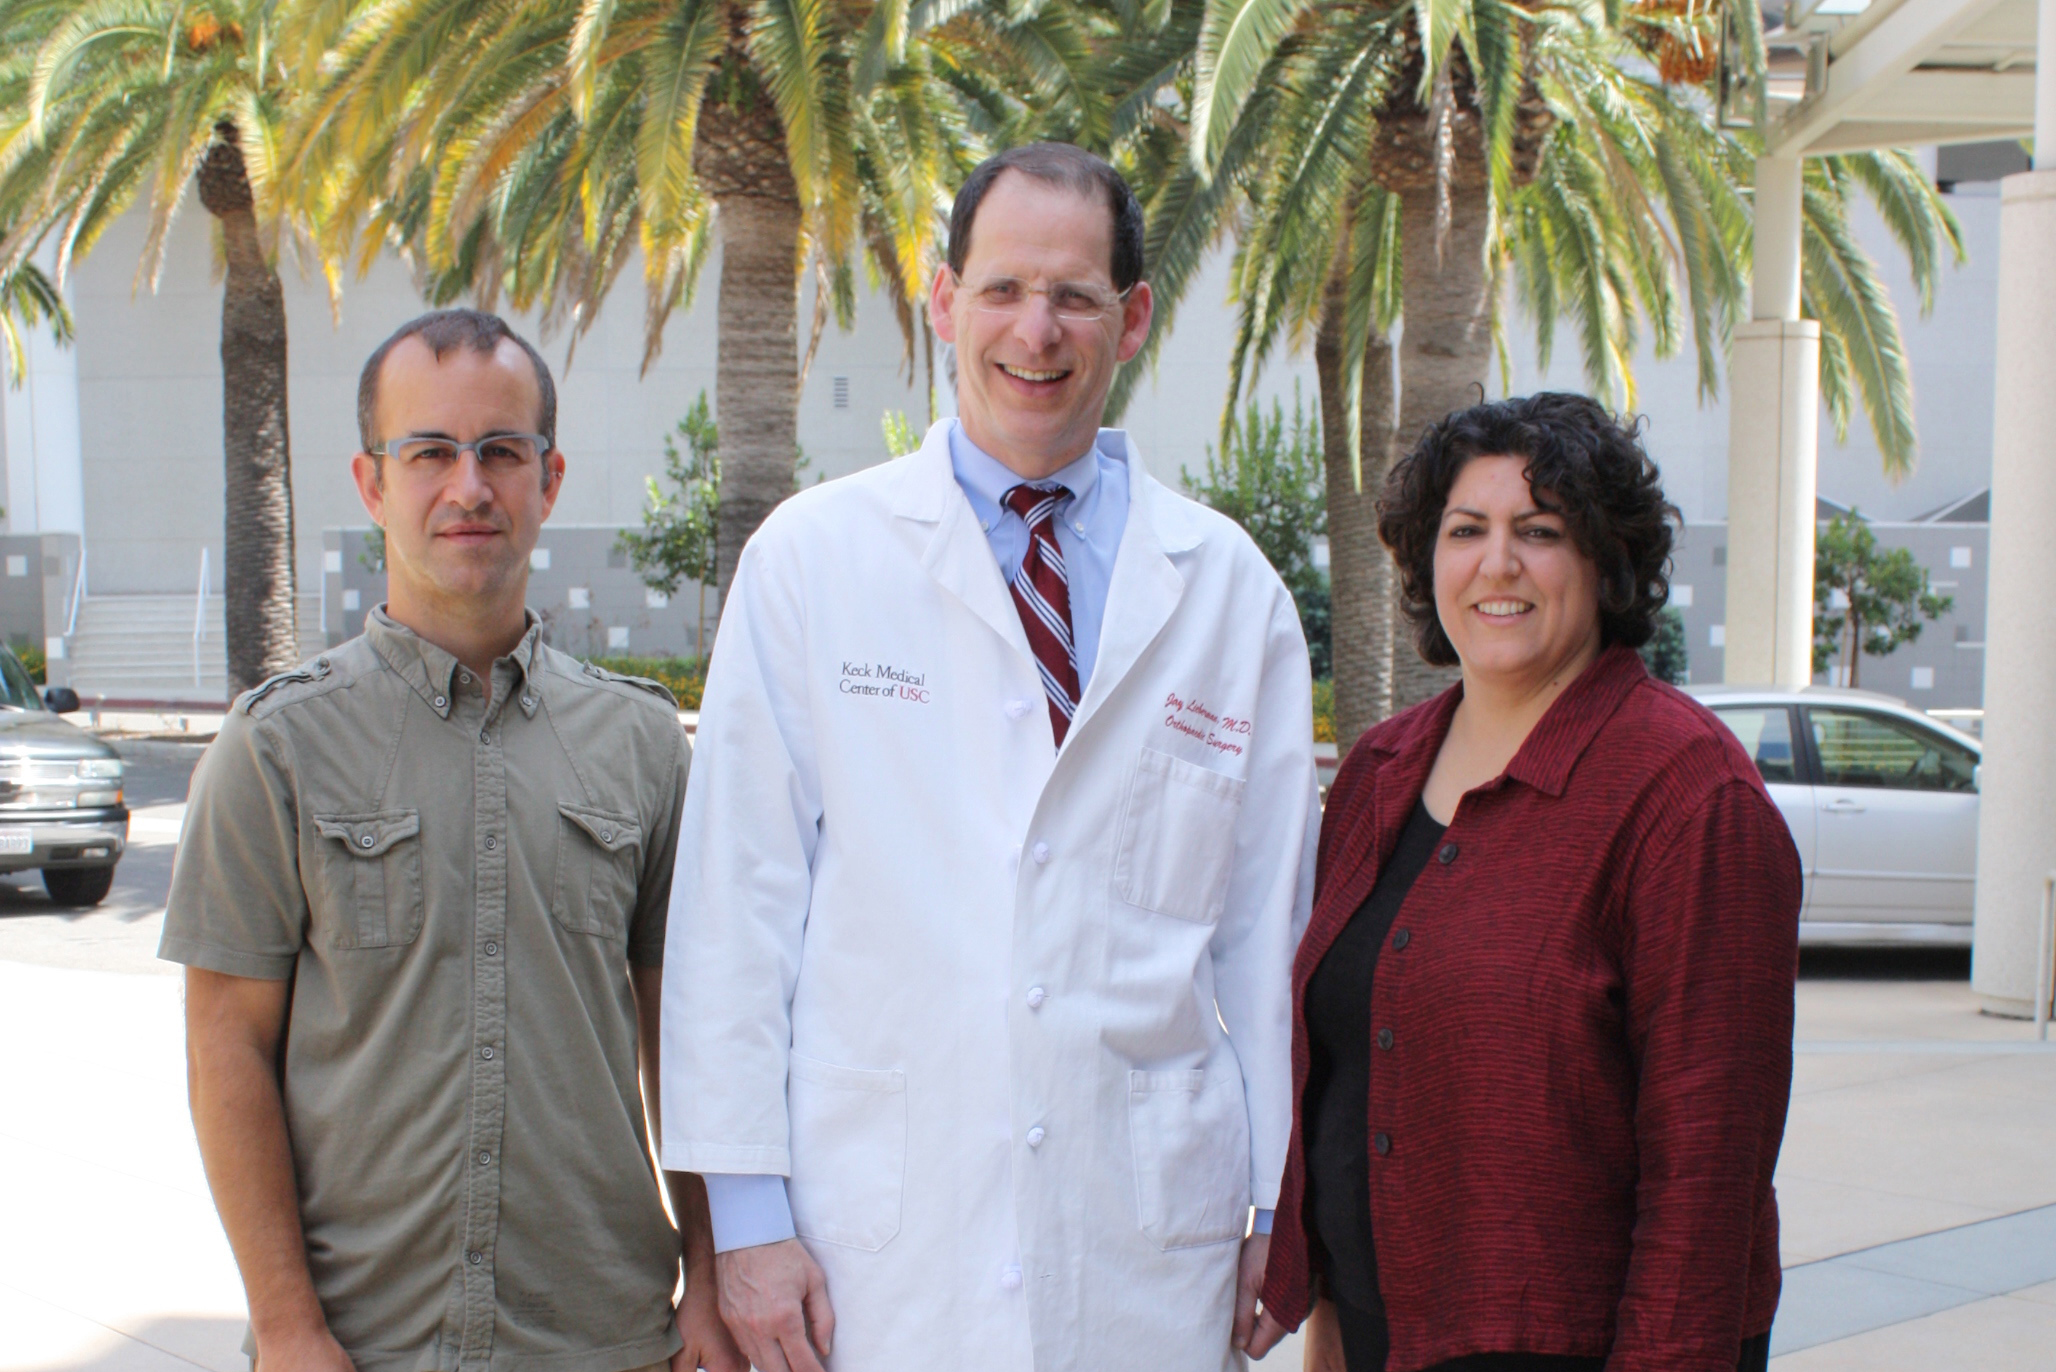 One winning team brings together Jay R. Lieberman, center, a clinical orthopaedic surgeon and chair of the Department of Orthopaedic Surgery, and two researchers within the Eli and Edythe Broad Center for Regenerative Medicine and Stem Cell Research — Gage Crump and Francesca Mariani.